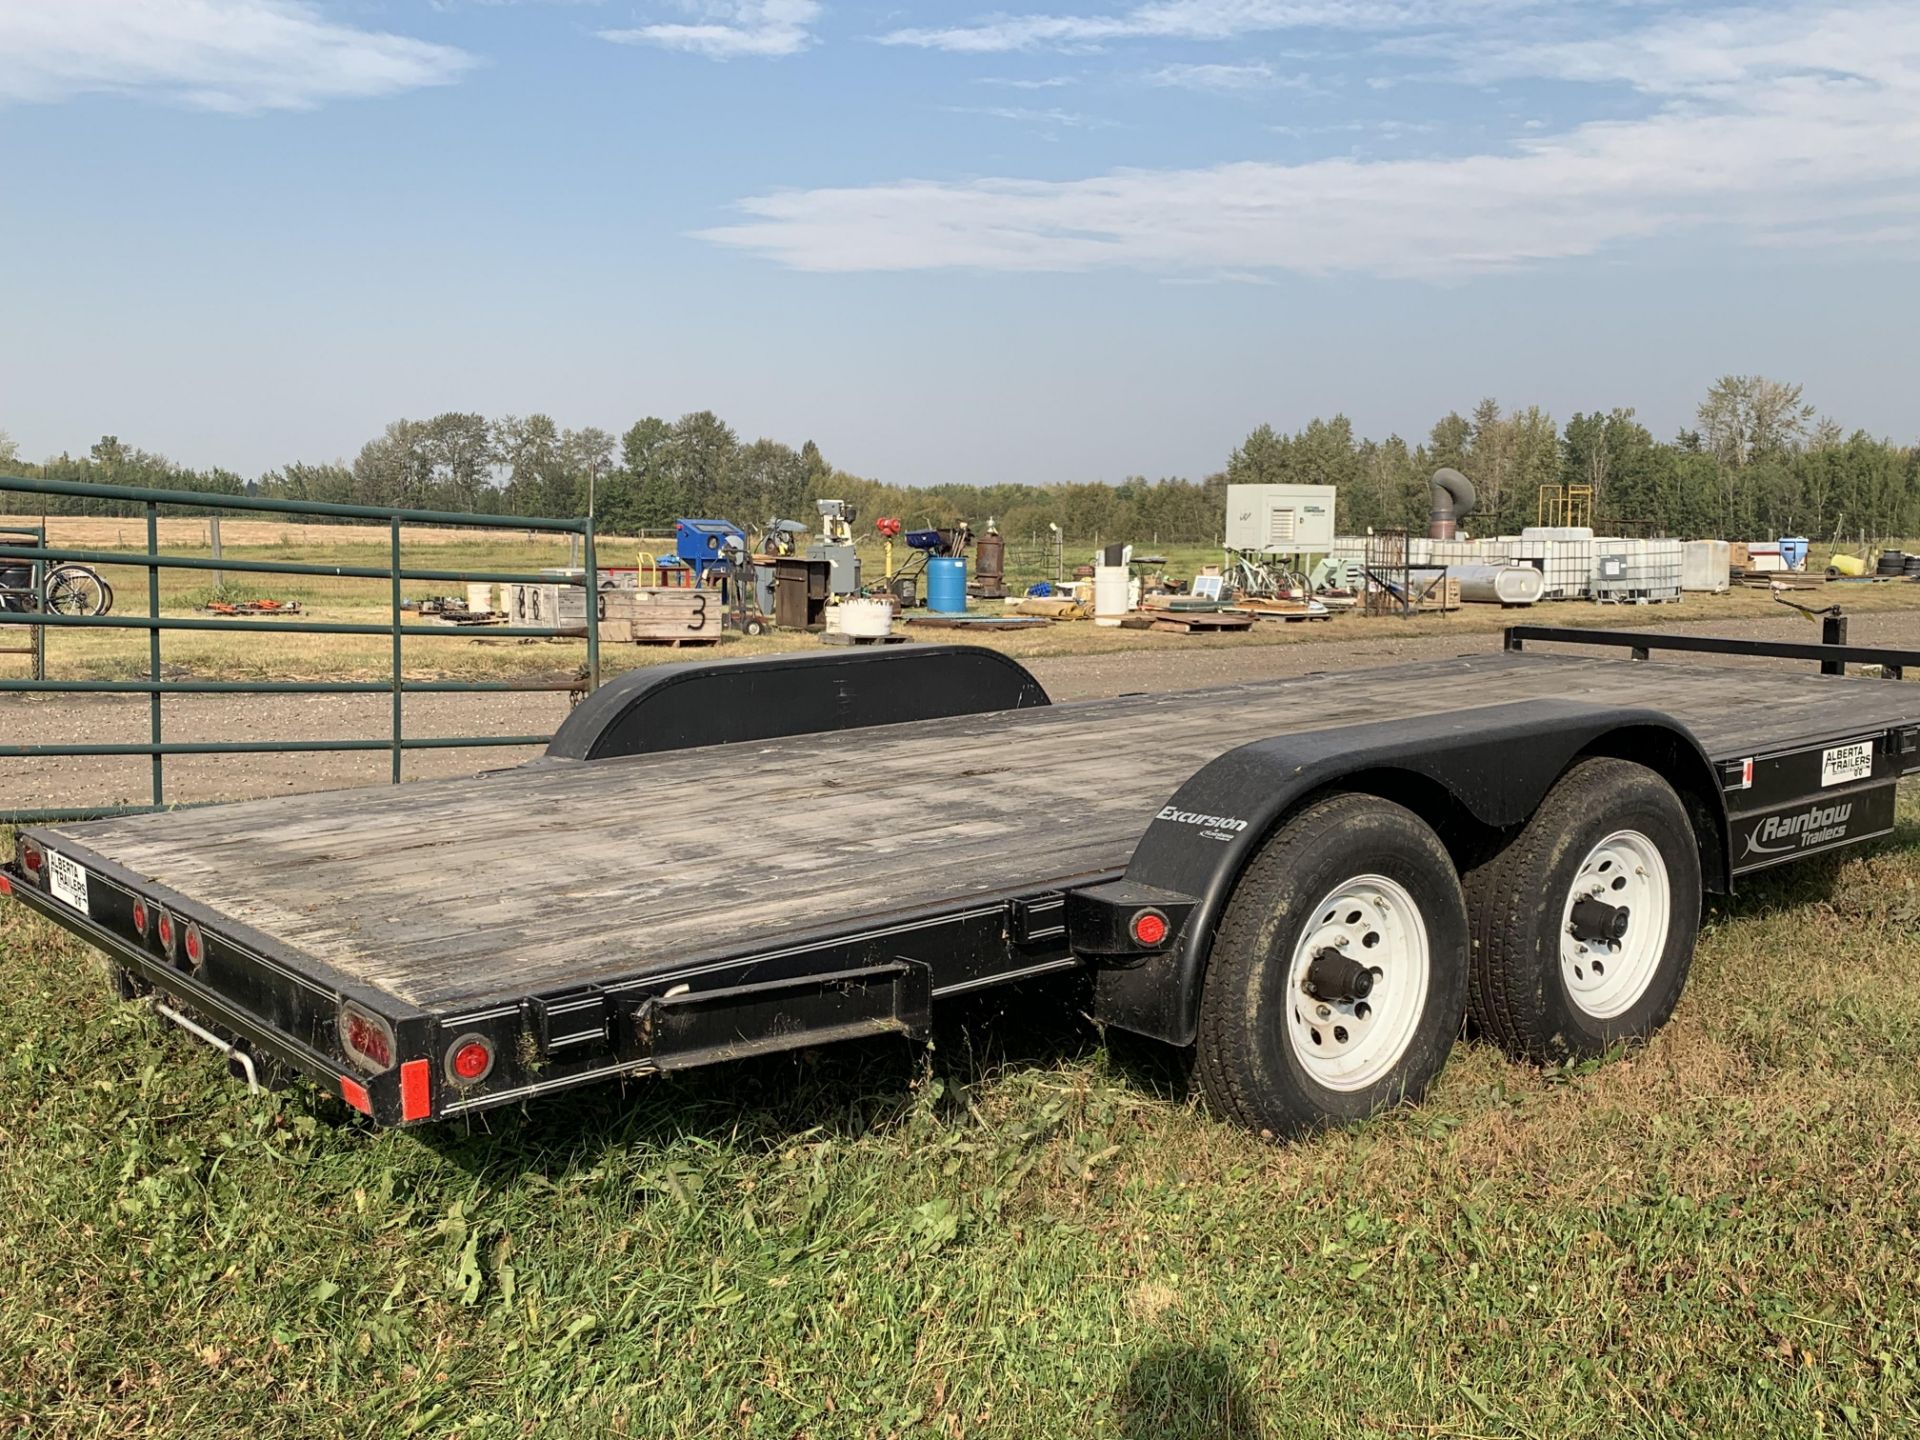 2014 RAINBOW TRAILERS 6518M EXCURSION 18FT FLAT DECK TRAILER, T/A, 4,950LBS AXLES, 9,900 LB GVWR, - Image 5 of 6